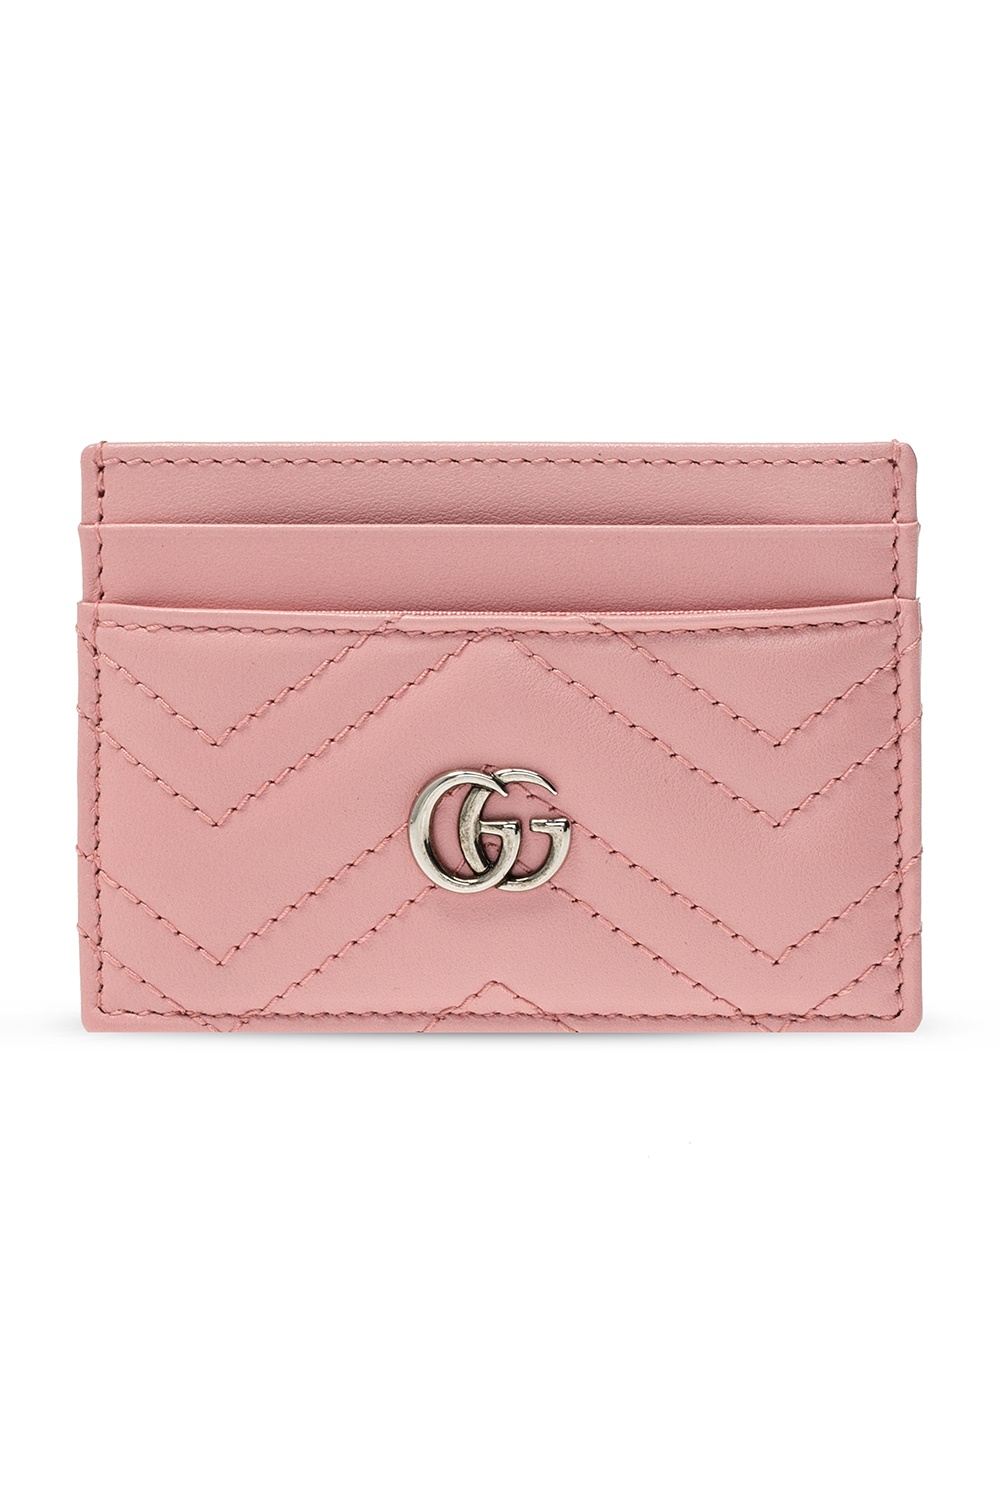 gucci marmont card case pink